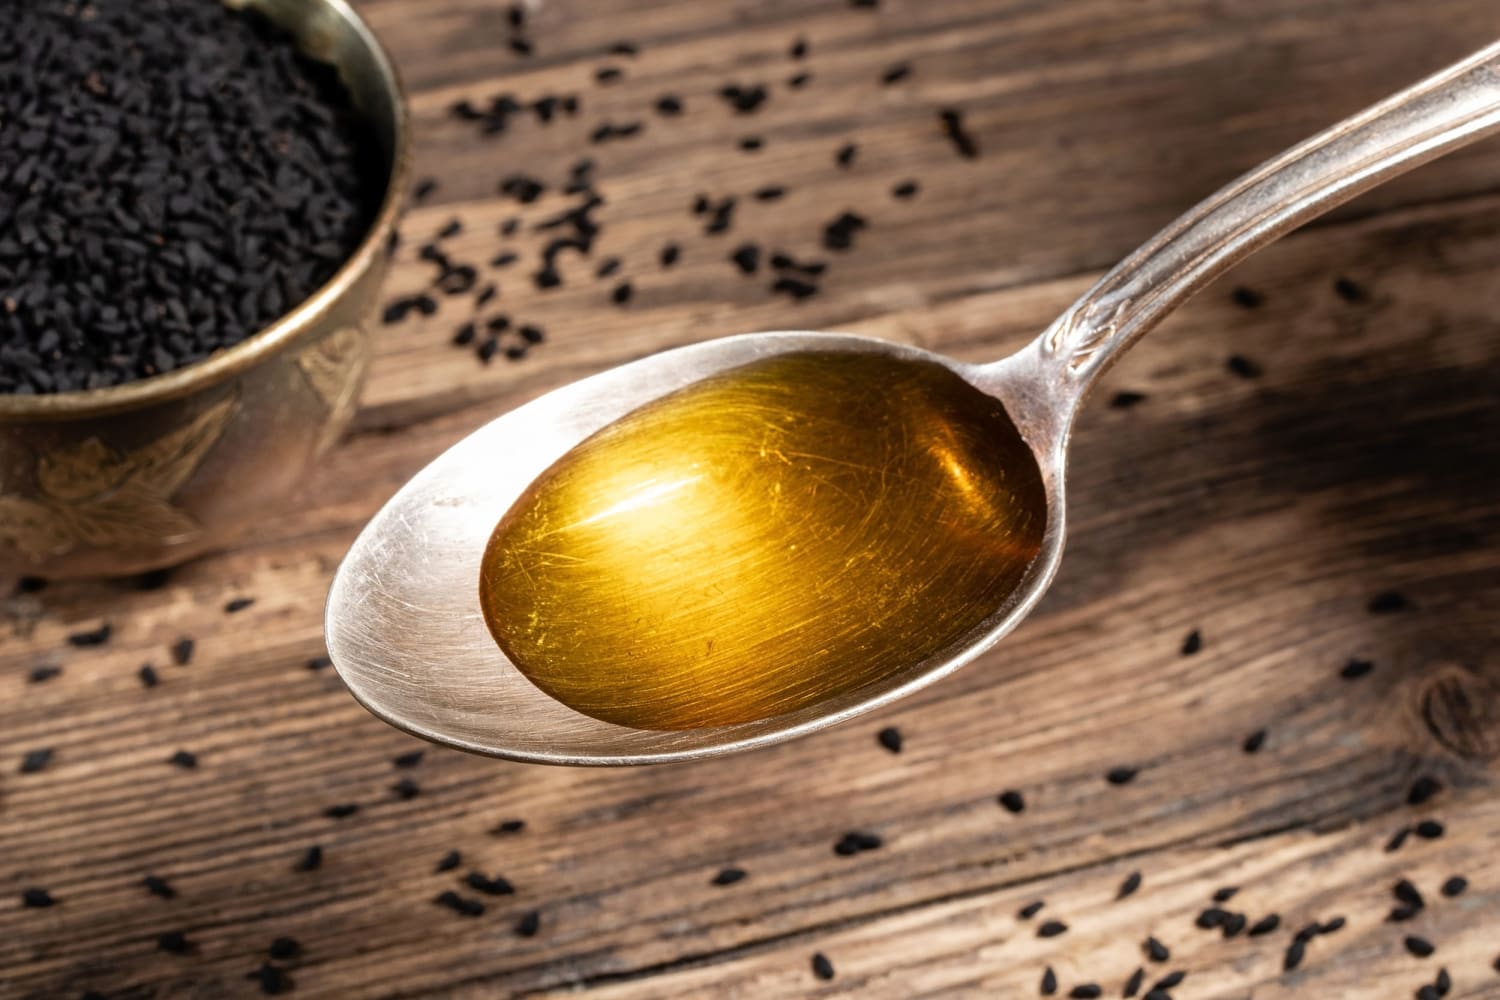 How To Use Black Seed Oil + Benefits 